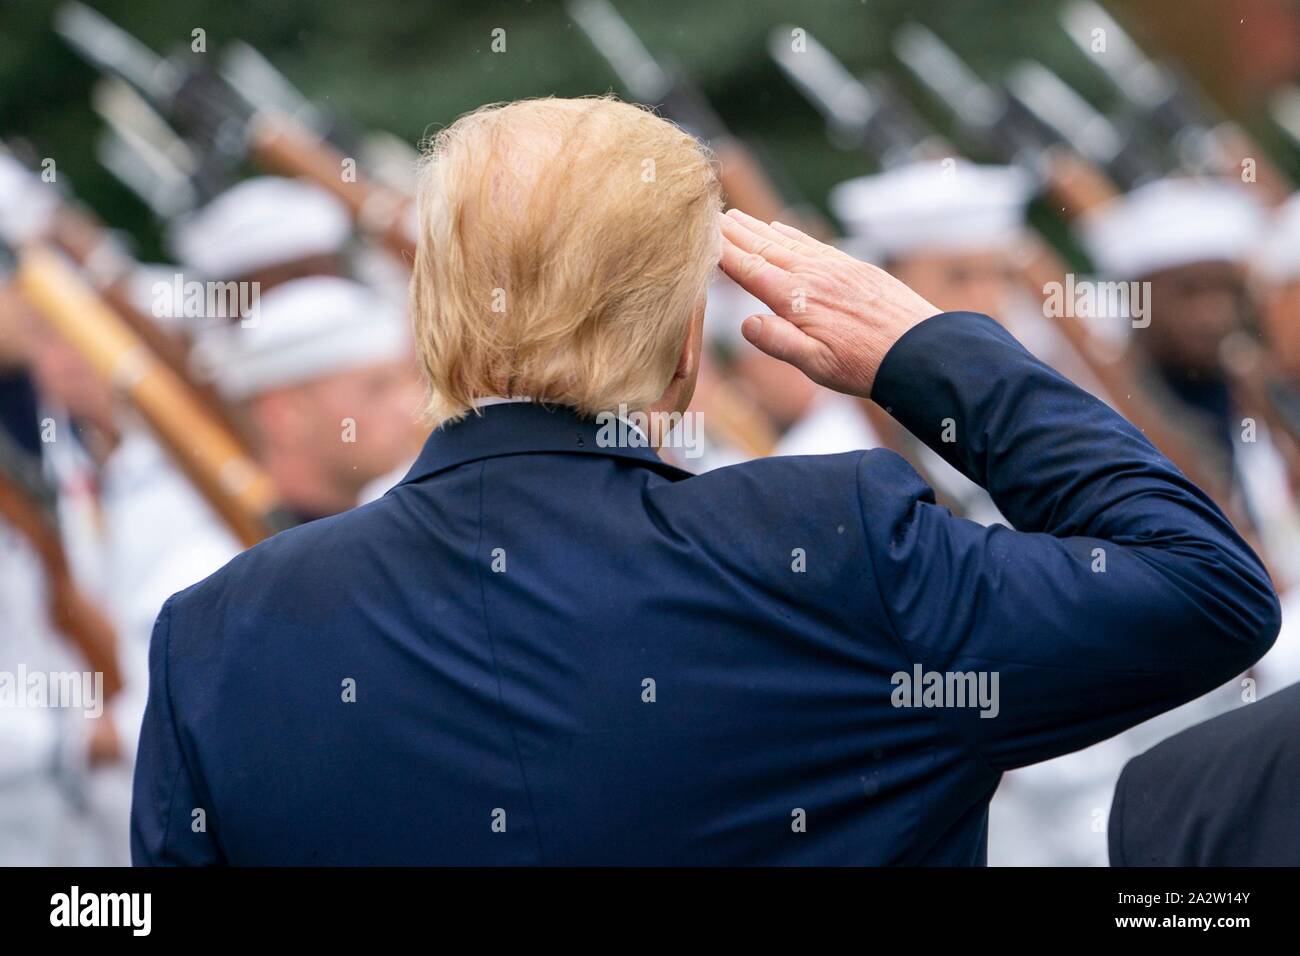 U.S President Donald Trump salutes during a review of troops at a ceremony marking the retirement of outgoing Chairman of the Joint Chiefs Gen. Joseph Dunford and the elevation of incoming Chairman Gen. Mark Milley at Summerall Field, Joint Base Myer-Henderson Hall September 30, 2019 in Arlington, Virginia. Stock Photo